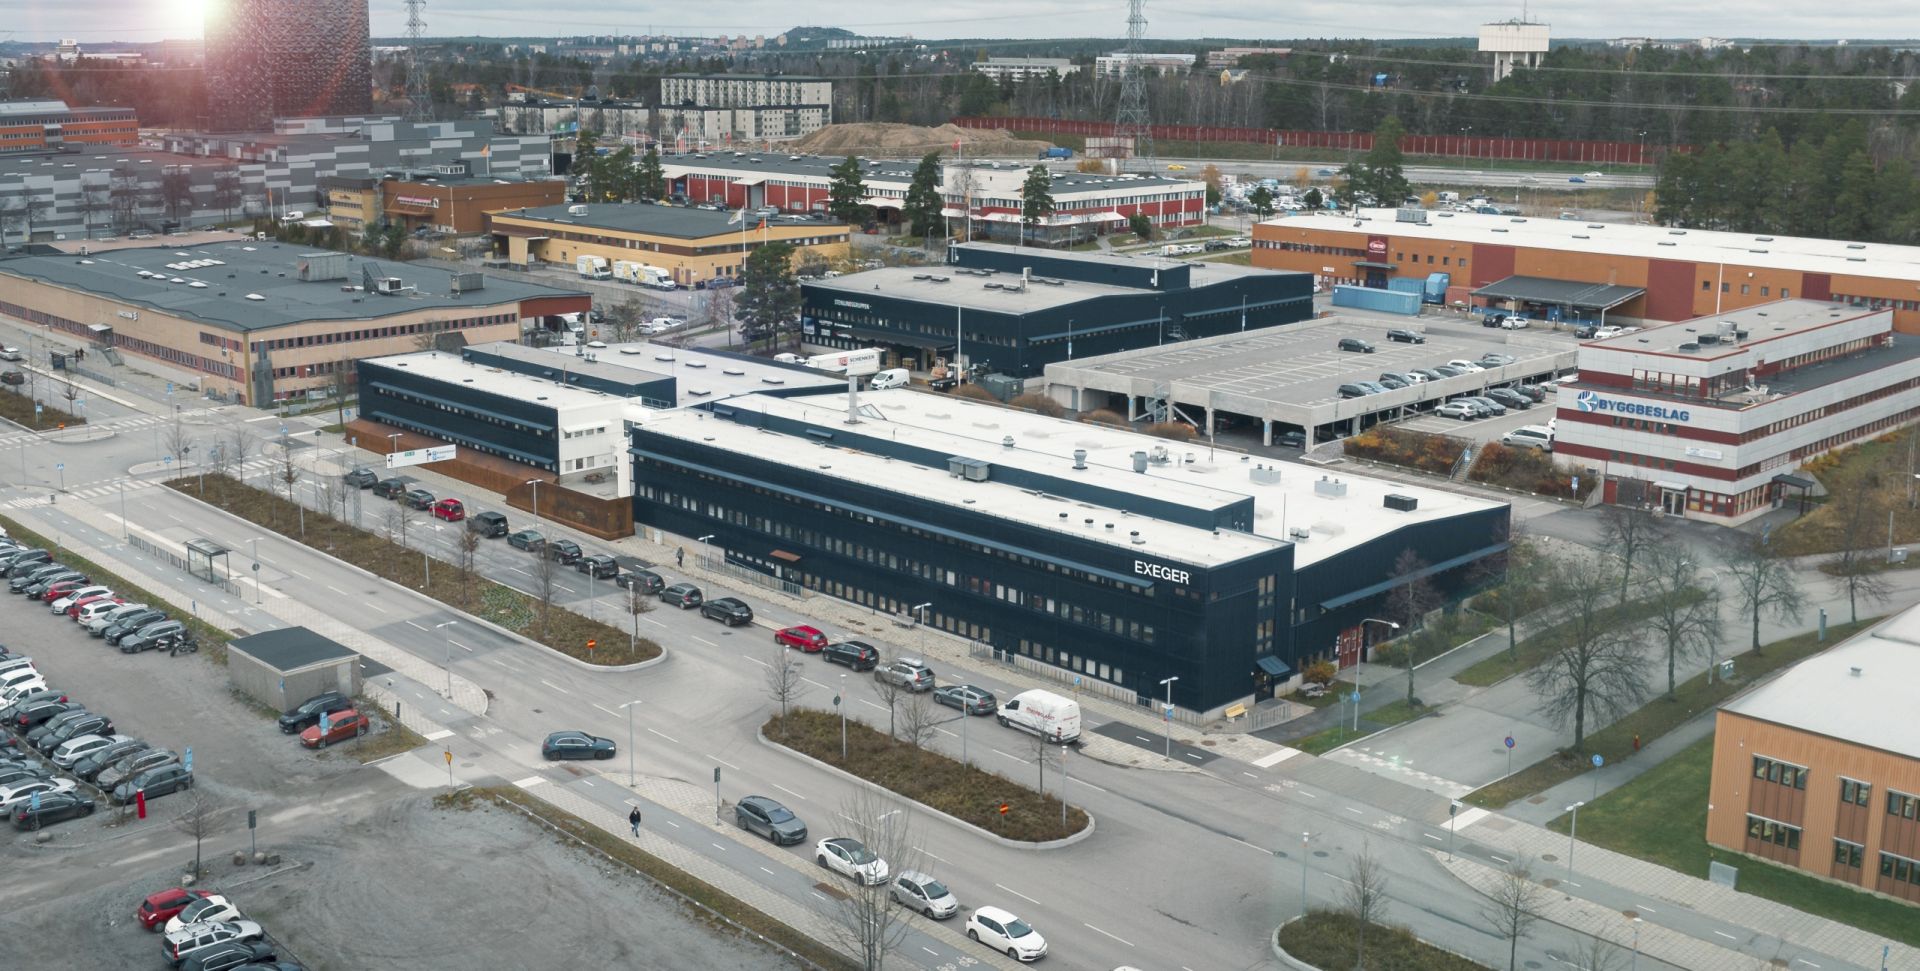 Exeger industrial-scale solar cell factory in Stockholm Sweden